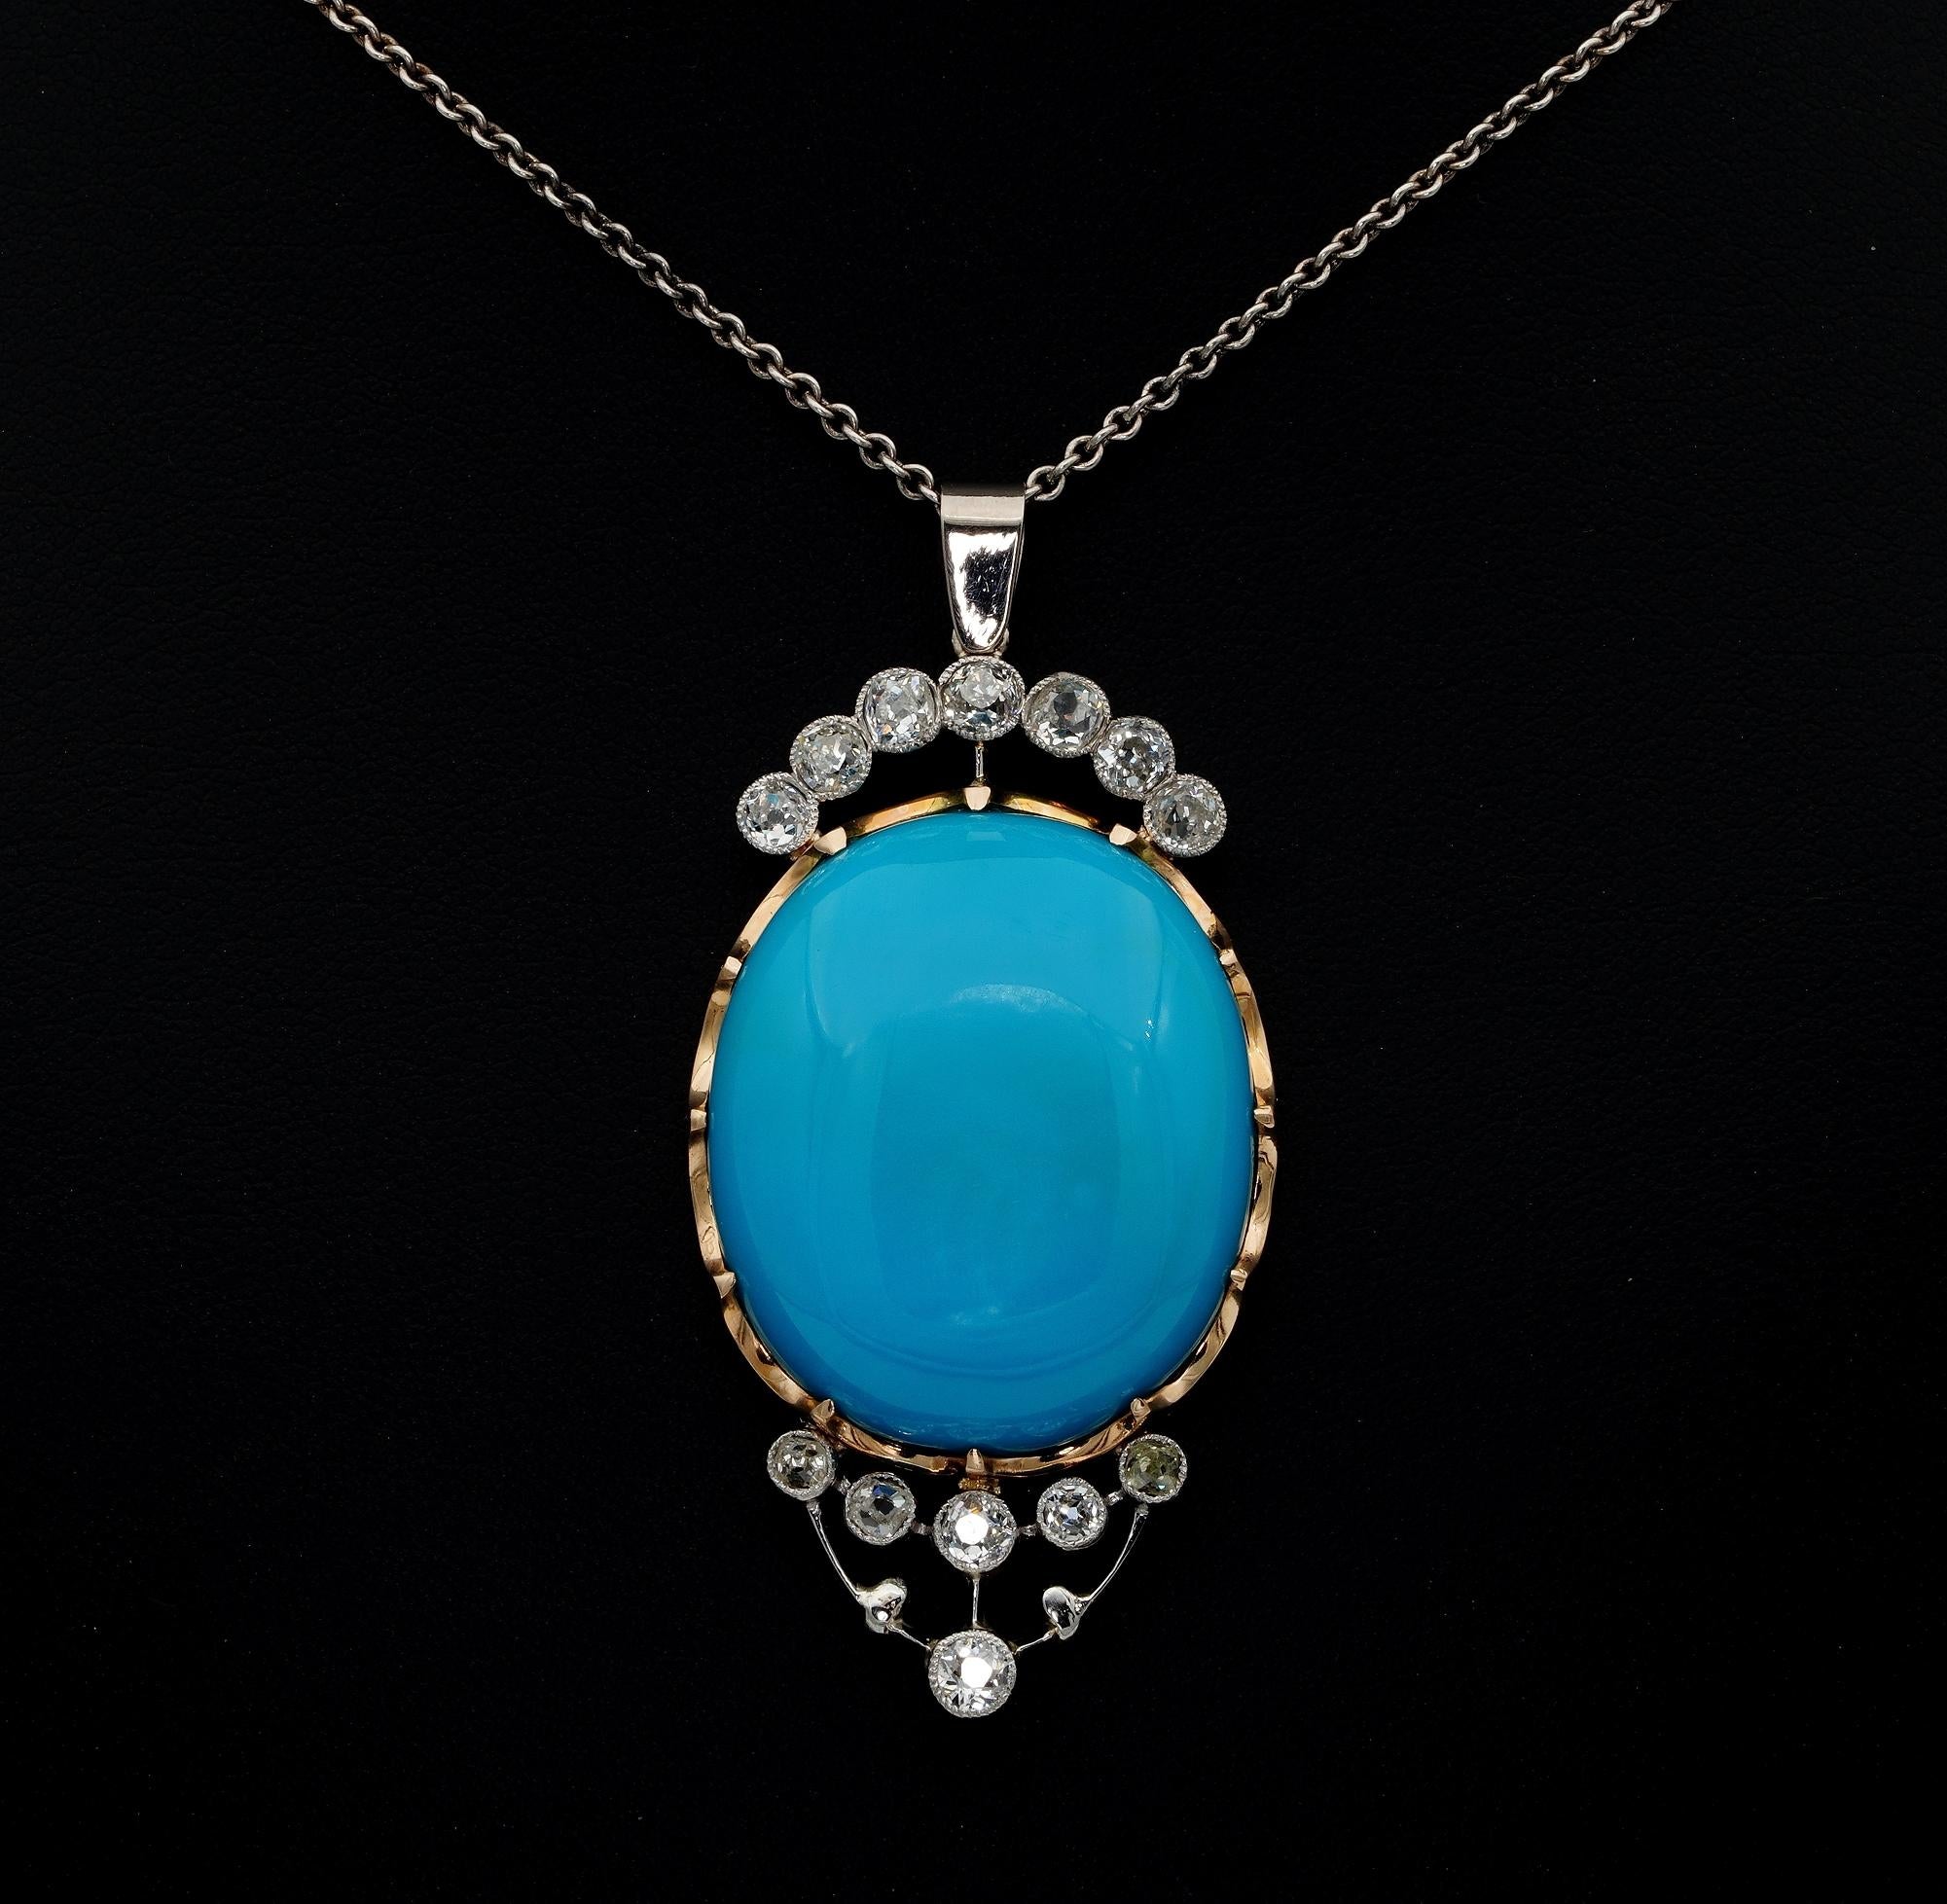 An impressive late Art Deco period large sized pendant.
Hand crafted of solid Platinum and solid 18 Kt setting for the main stone, 1930.
The focal point is the truly stunning, large, untreated, natural Turquoise of superb Robin egg colour, estimate